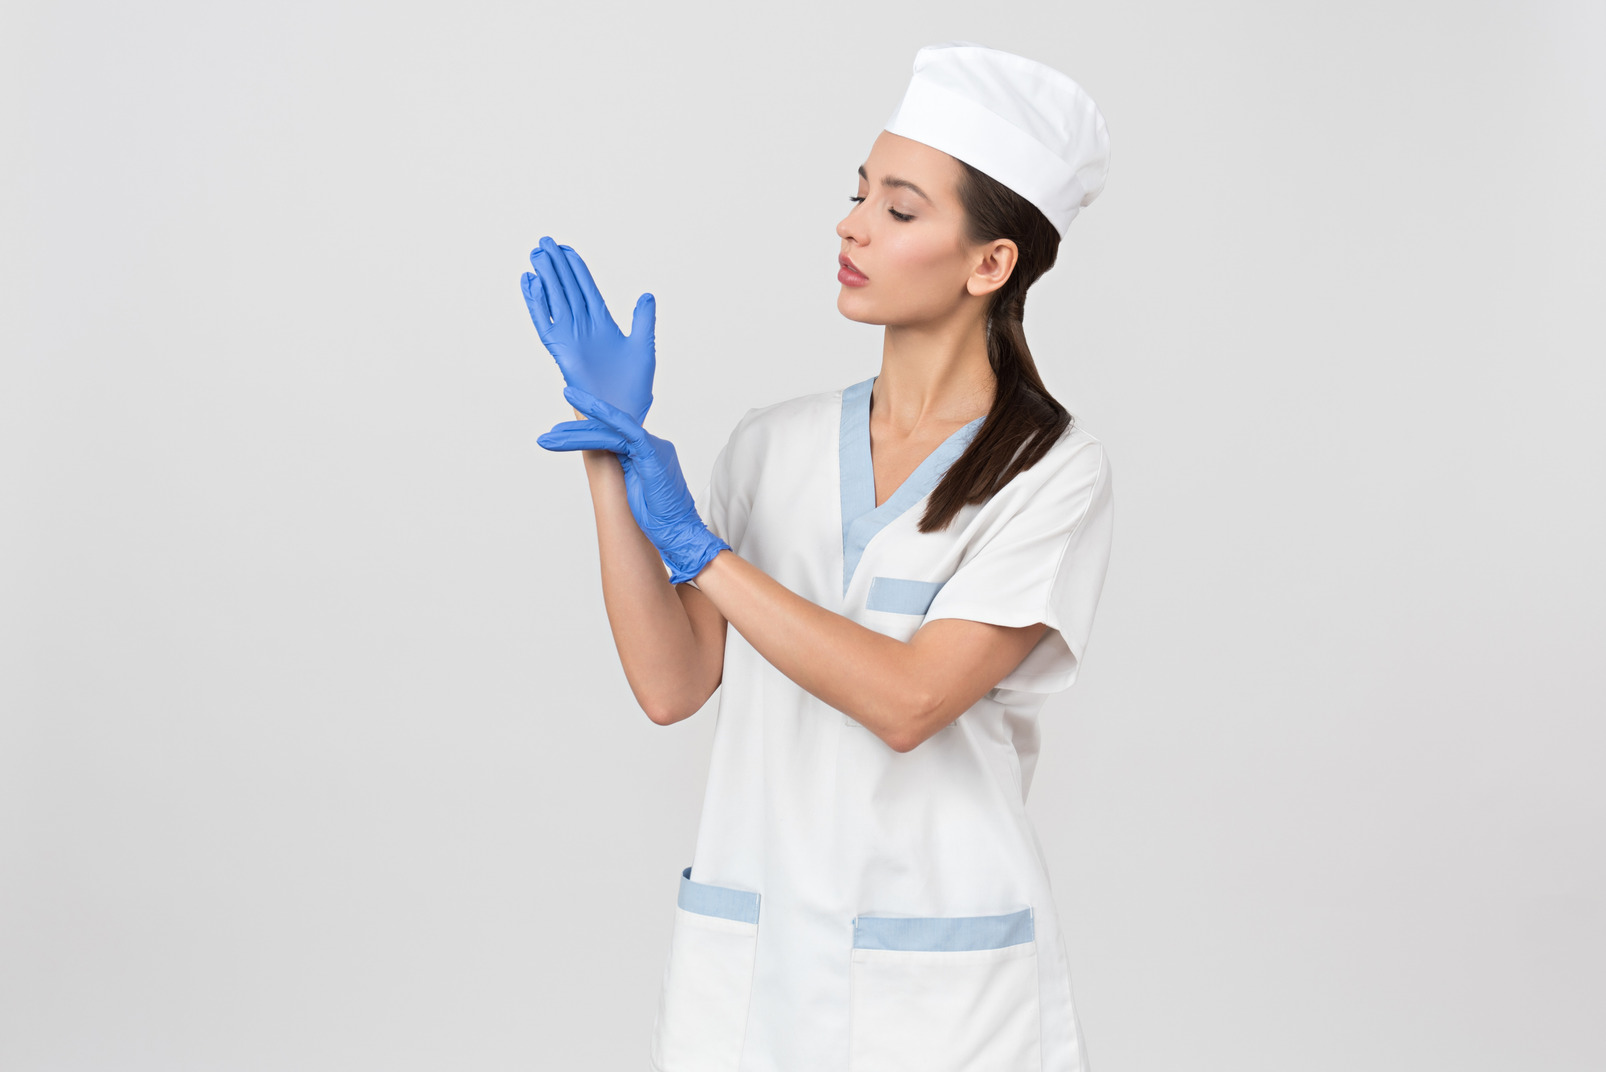 Wearing sterile gloves protect our patients